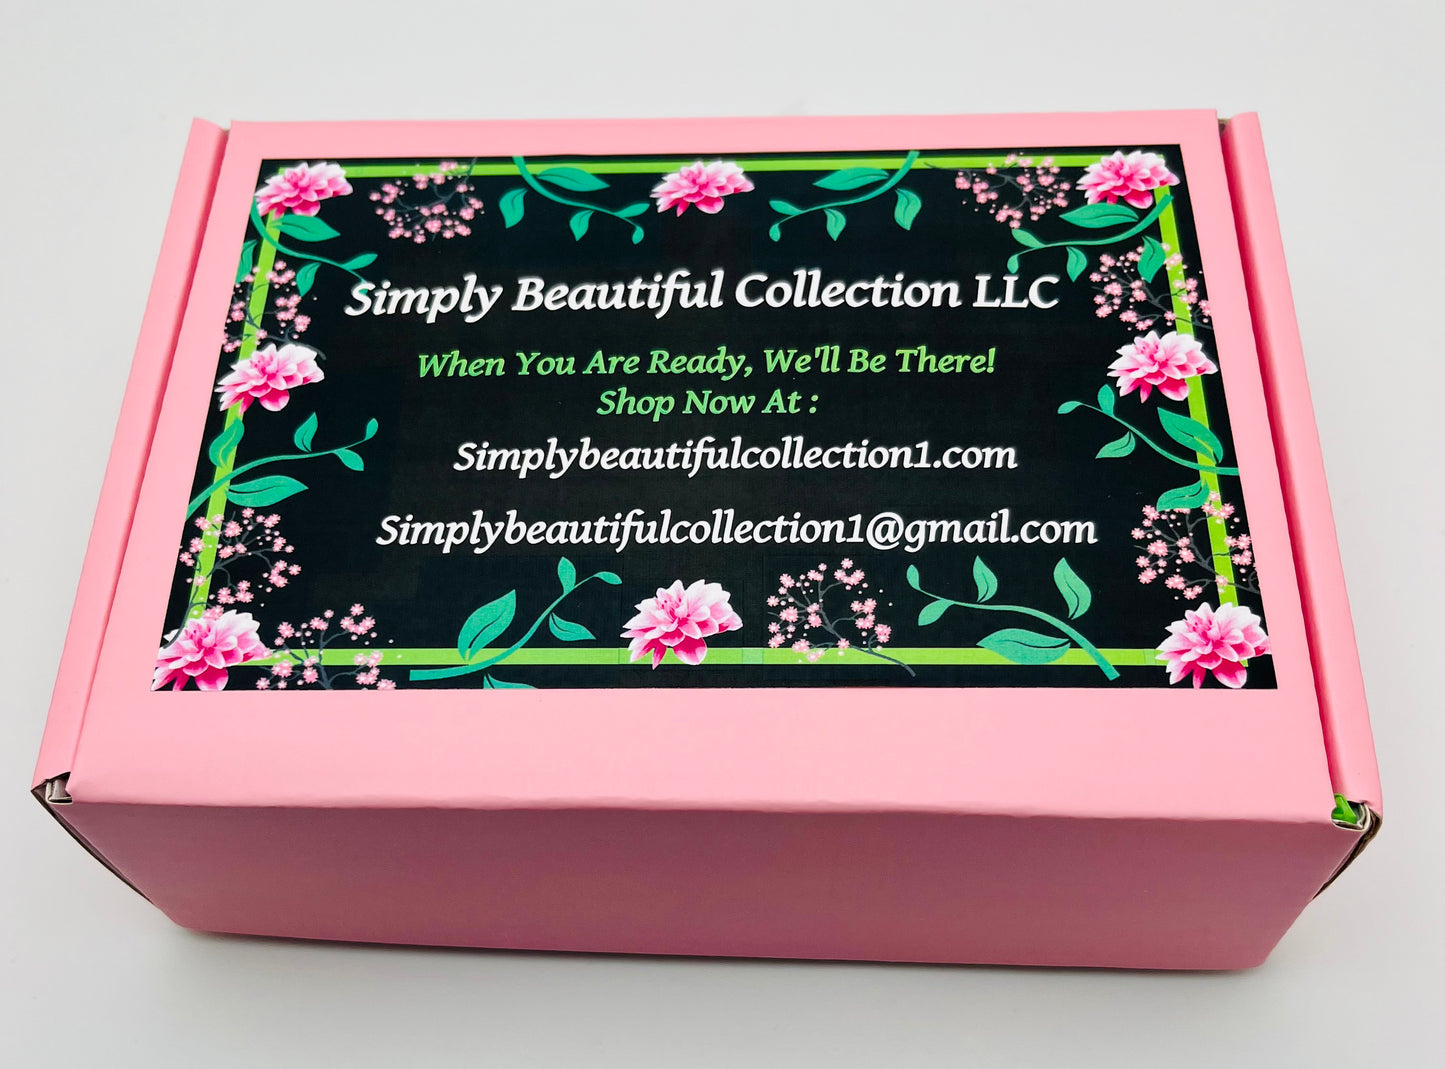 The Little Pink Box Gift Sets